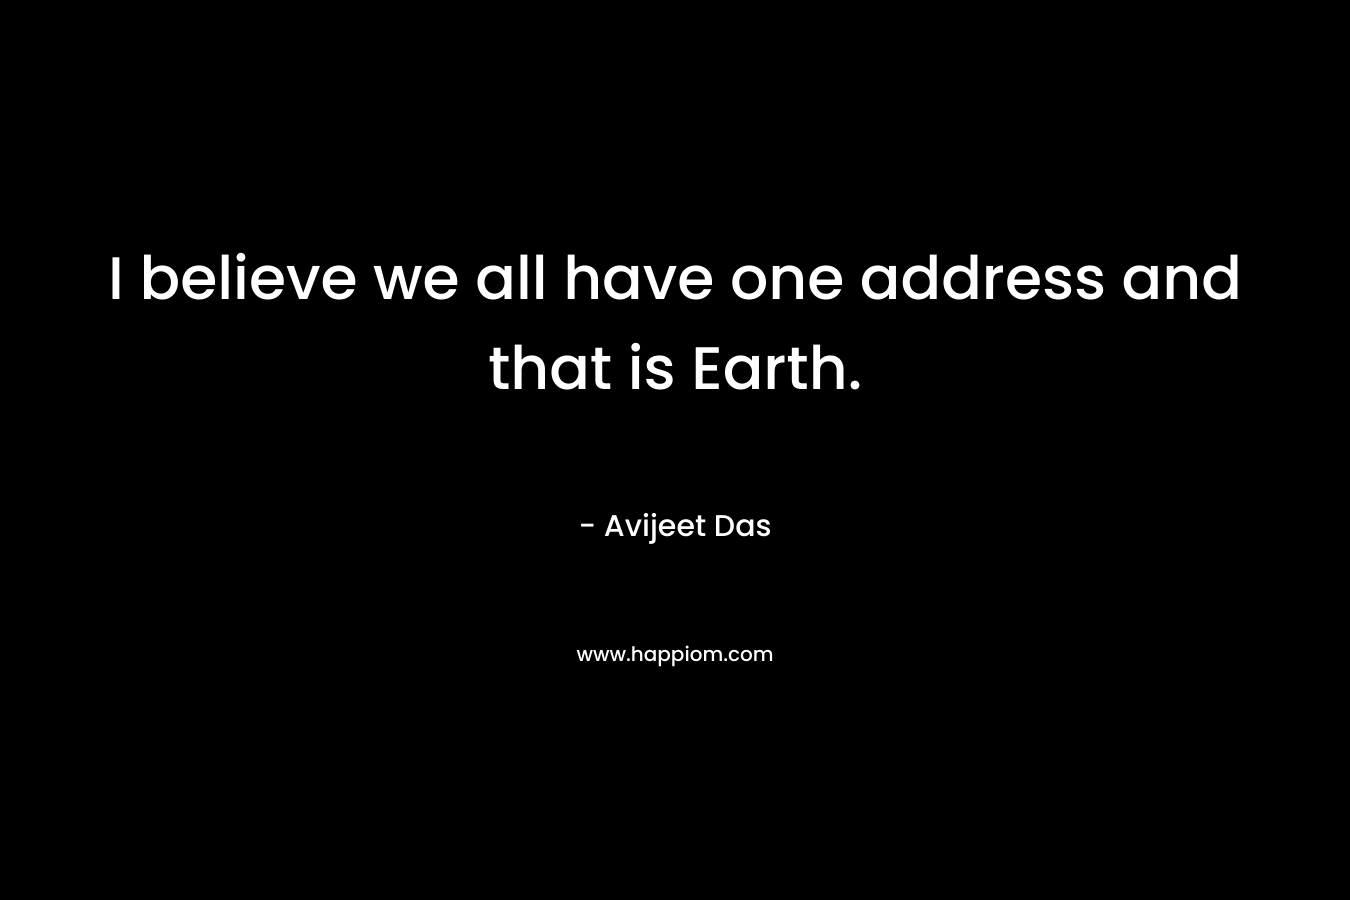 I believe we all have one address and that is Earth.